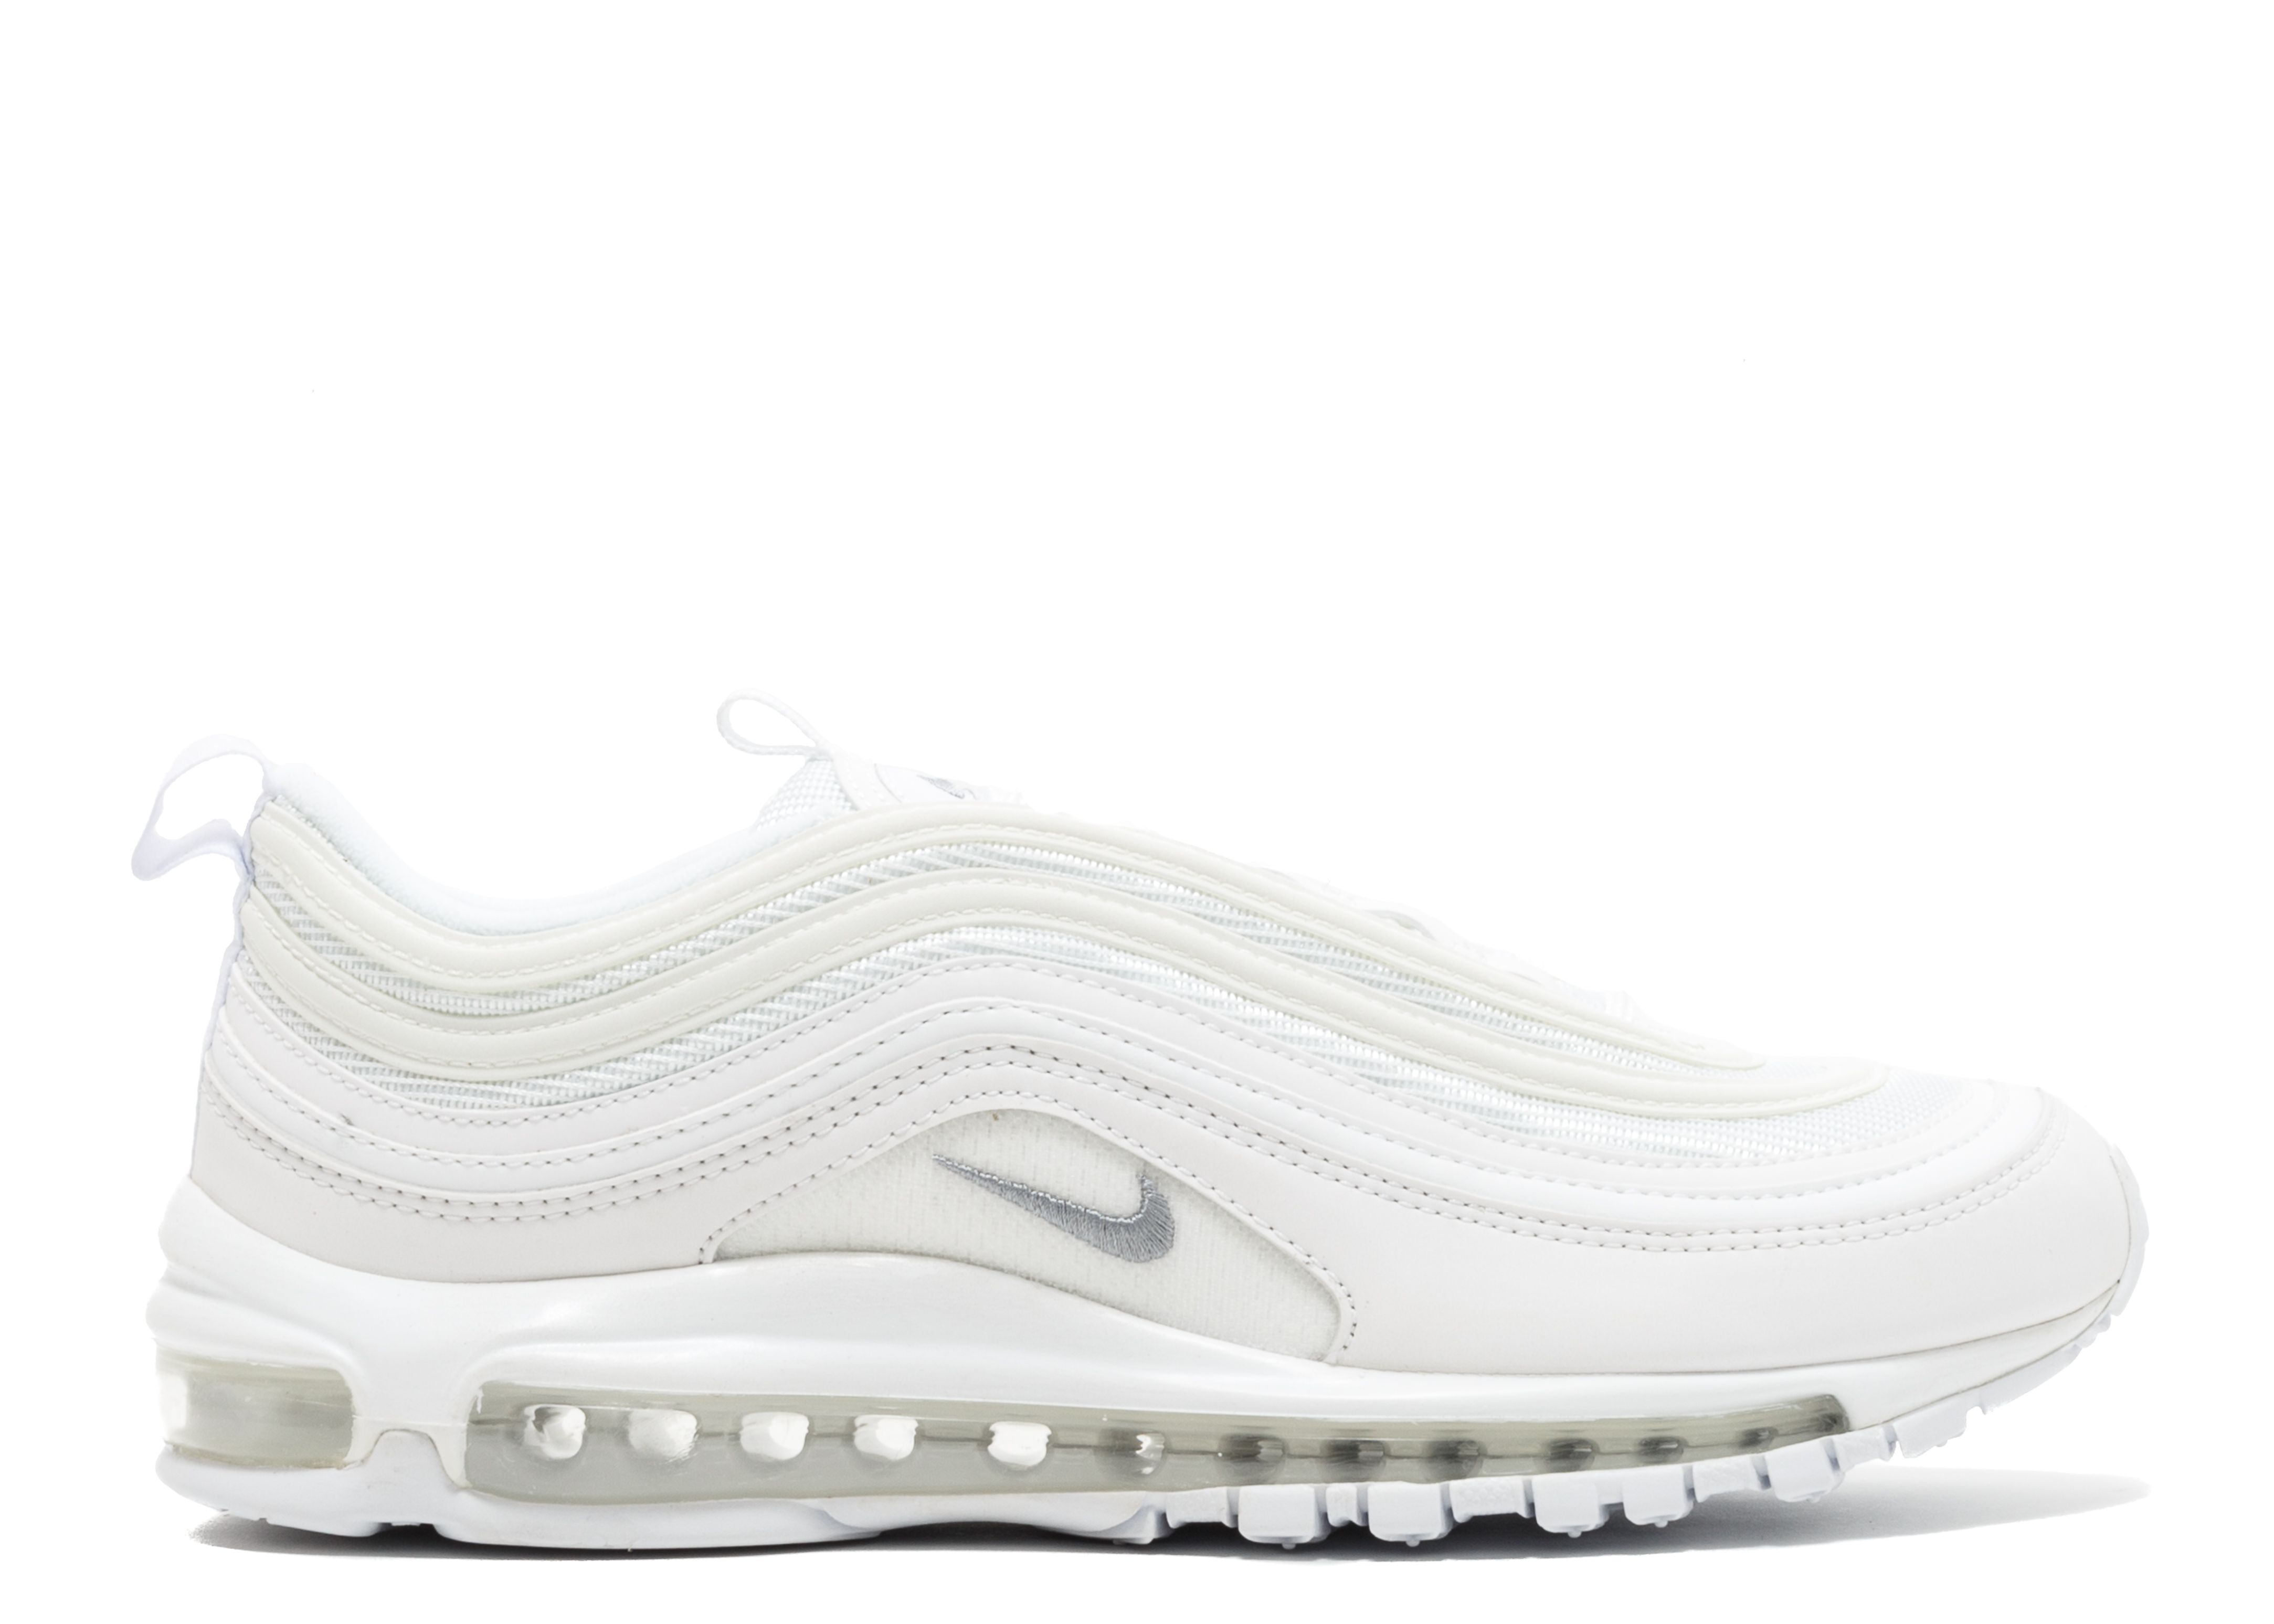 Nike Air Max 97 Mid Rt , nike clearance store locations,nike